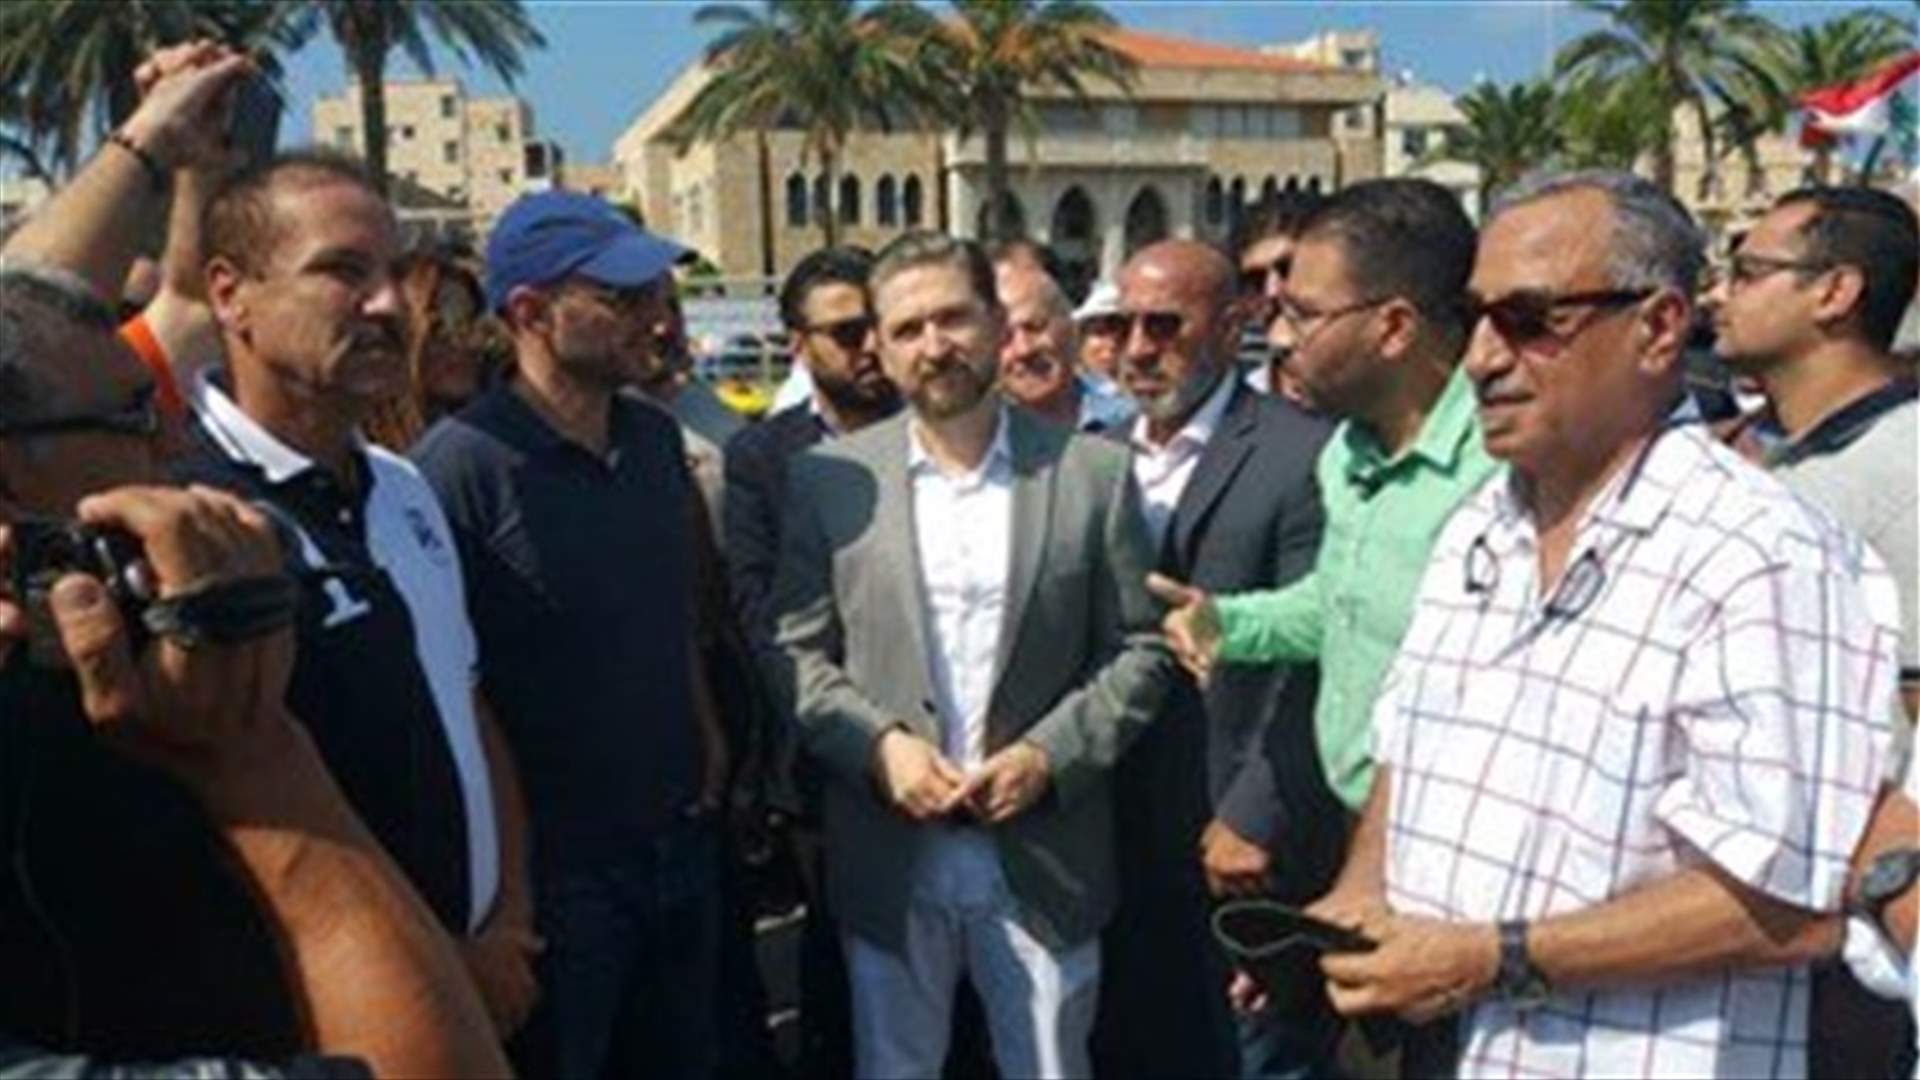 Environment Minister opens Tripoli Palm Islands nature reserve